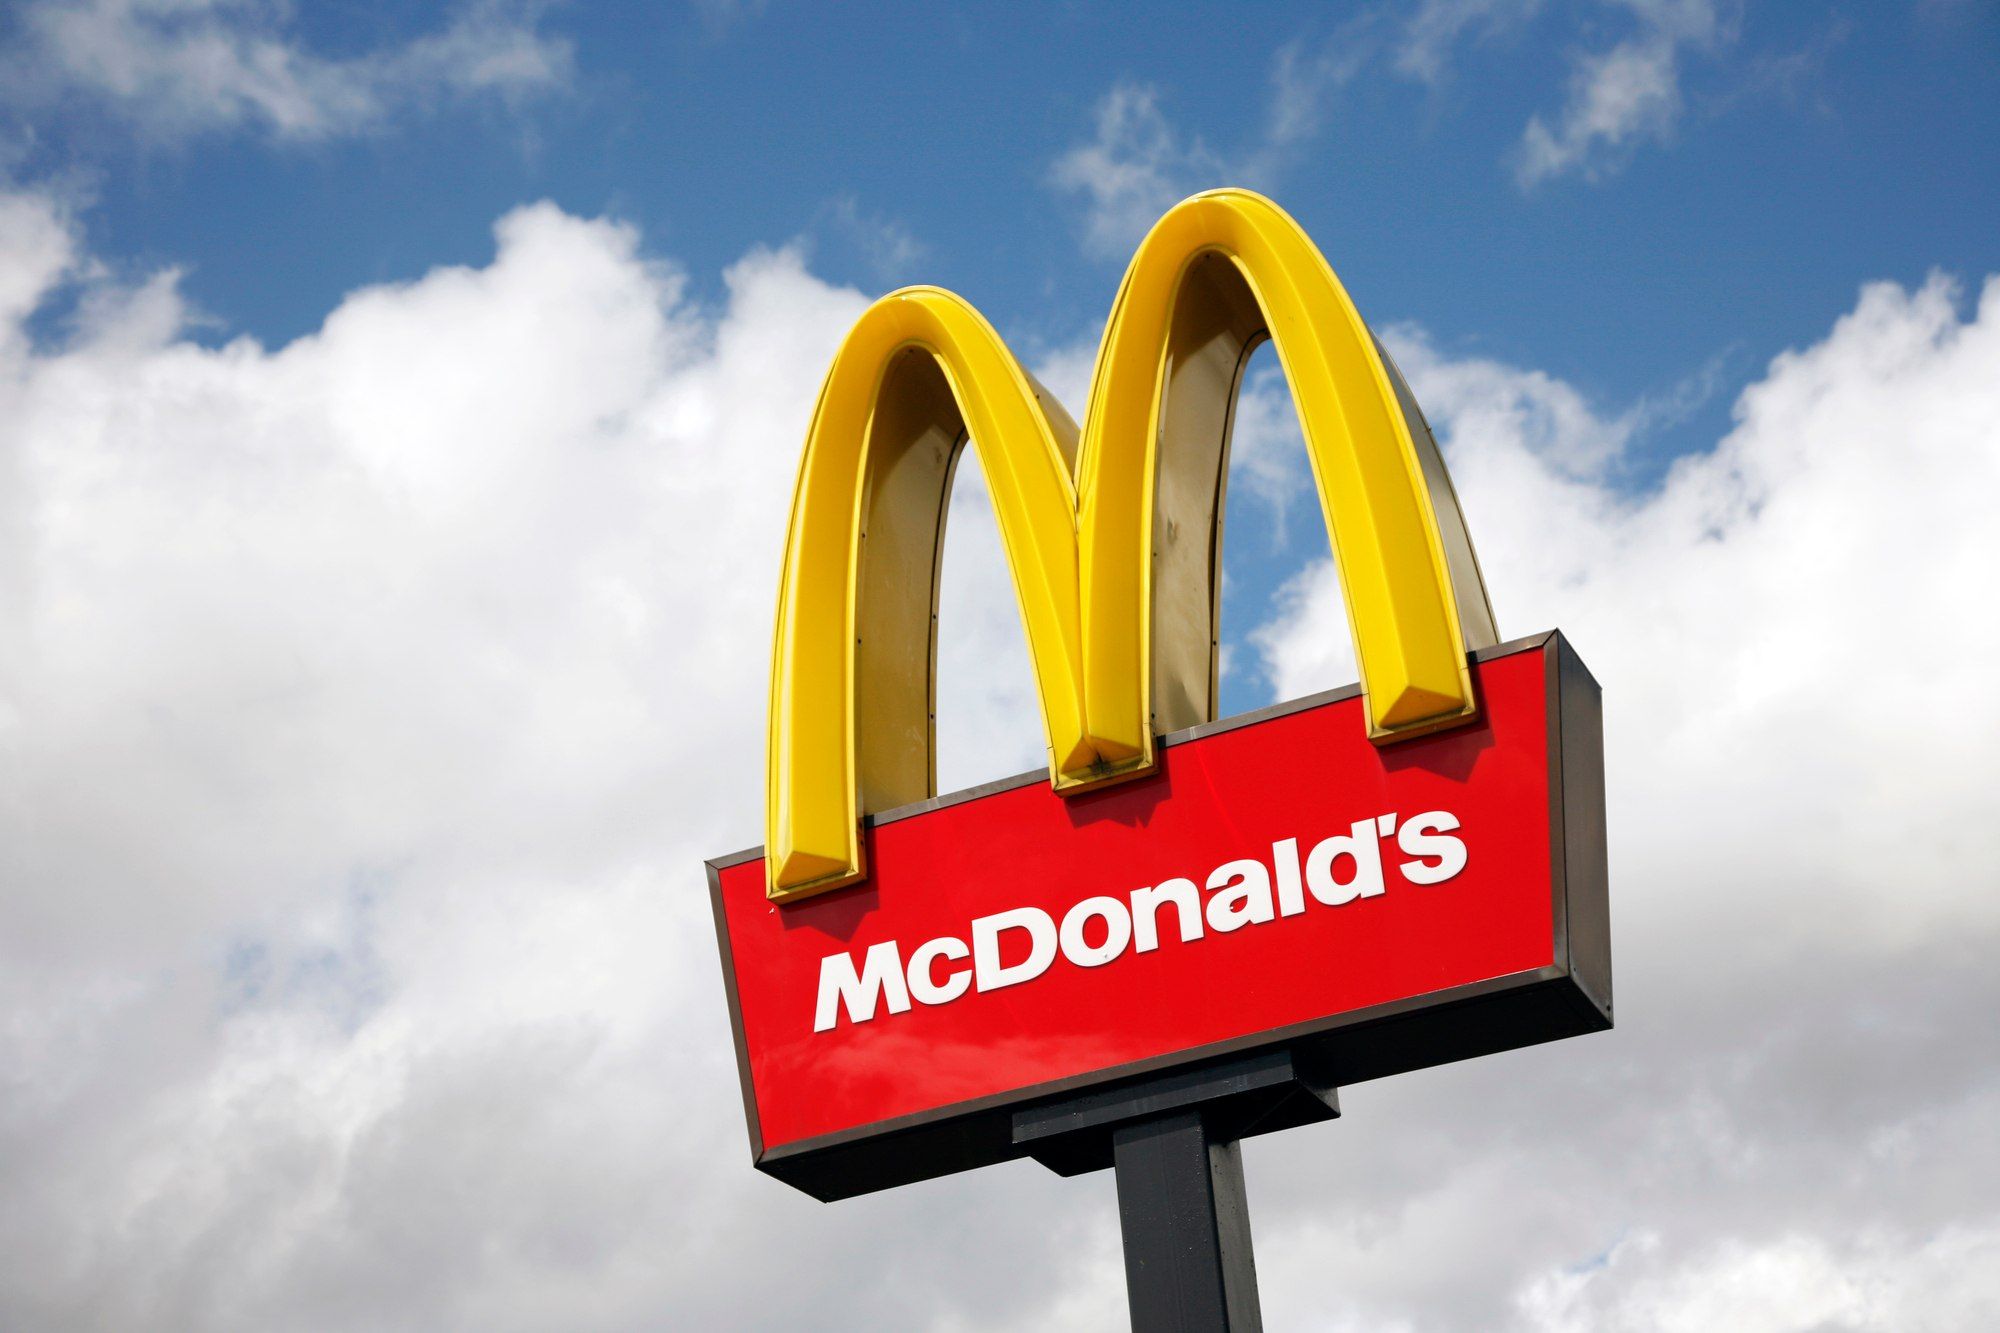 A Mcdonald's class action lawsuit has been filed over alleged racial discrimination.